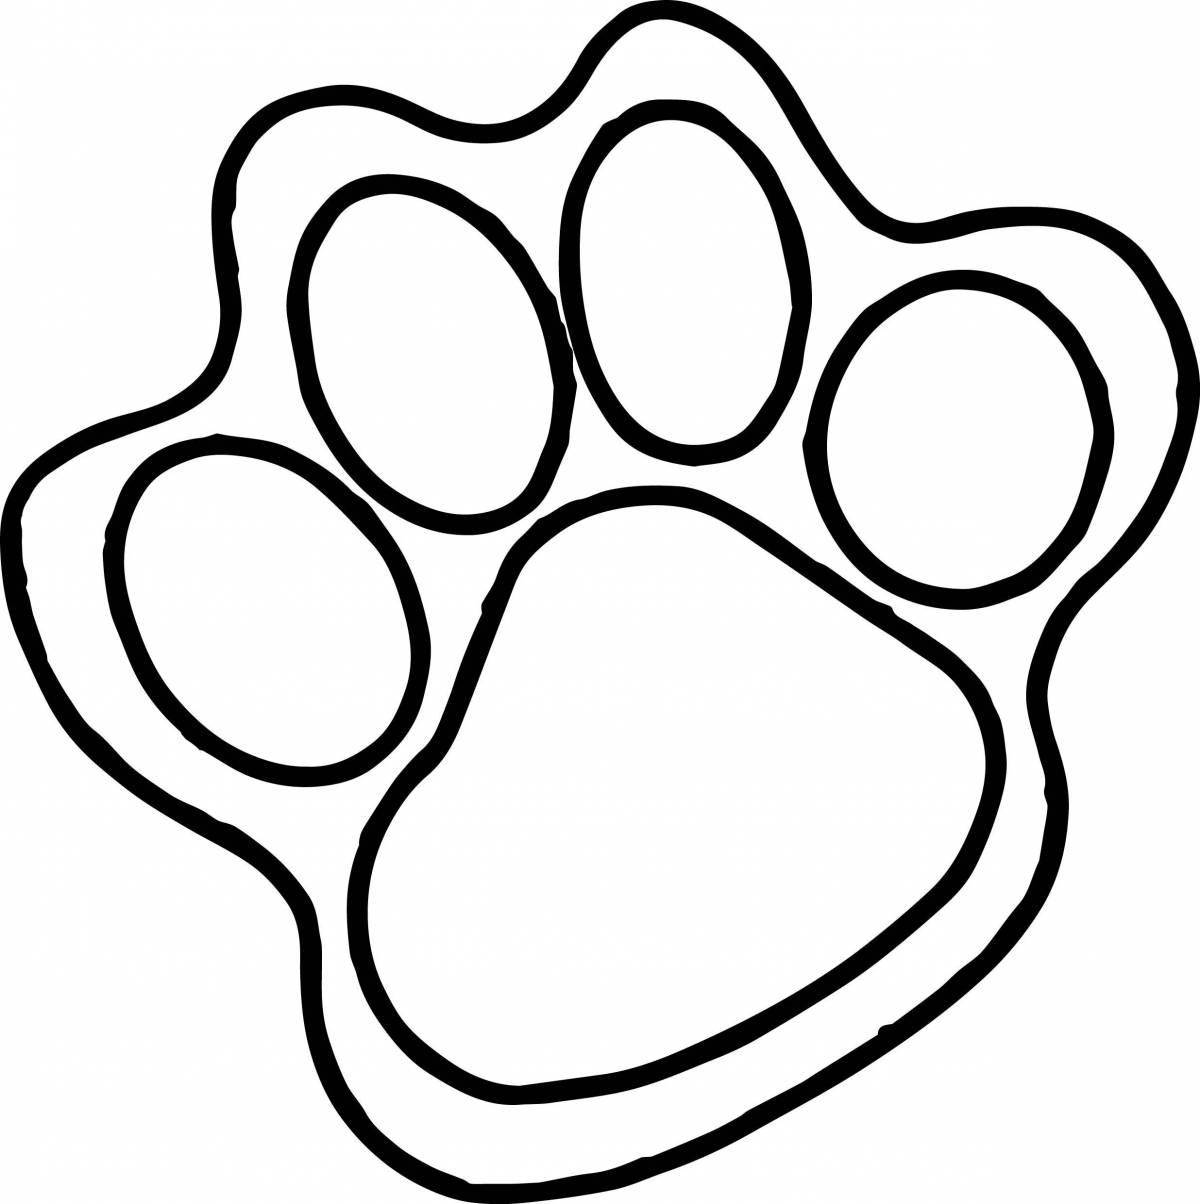 Coloring page beautiful cat paw